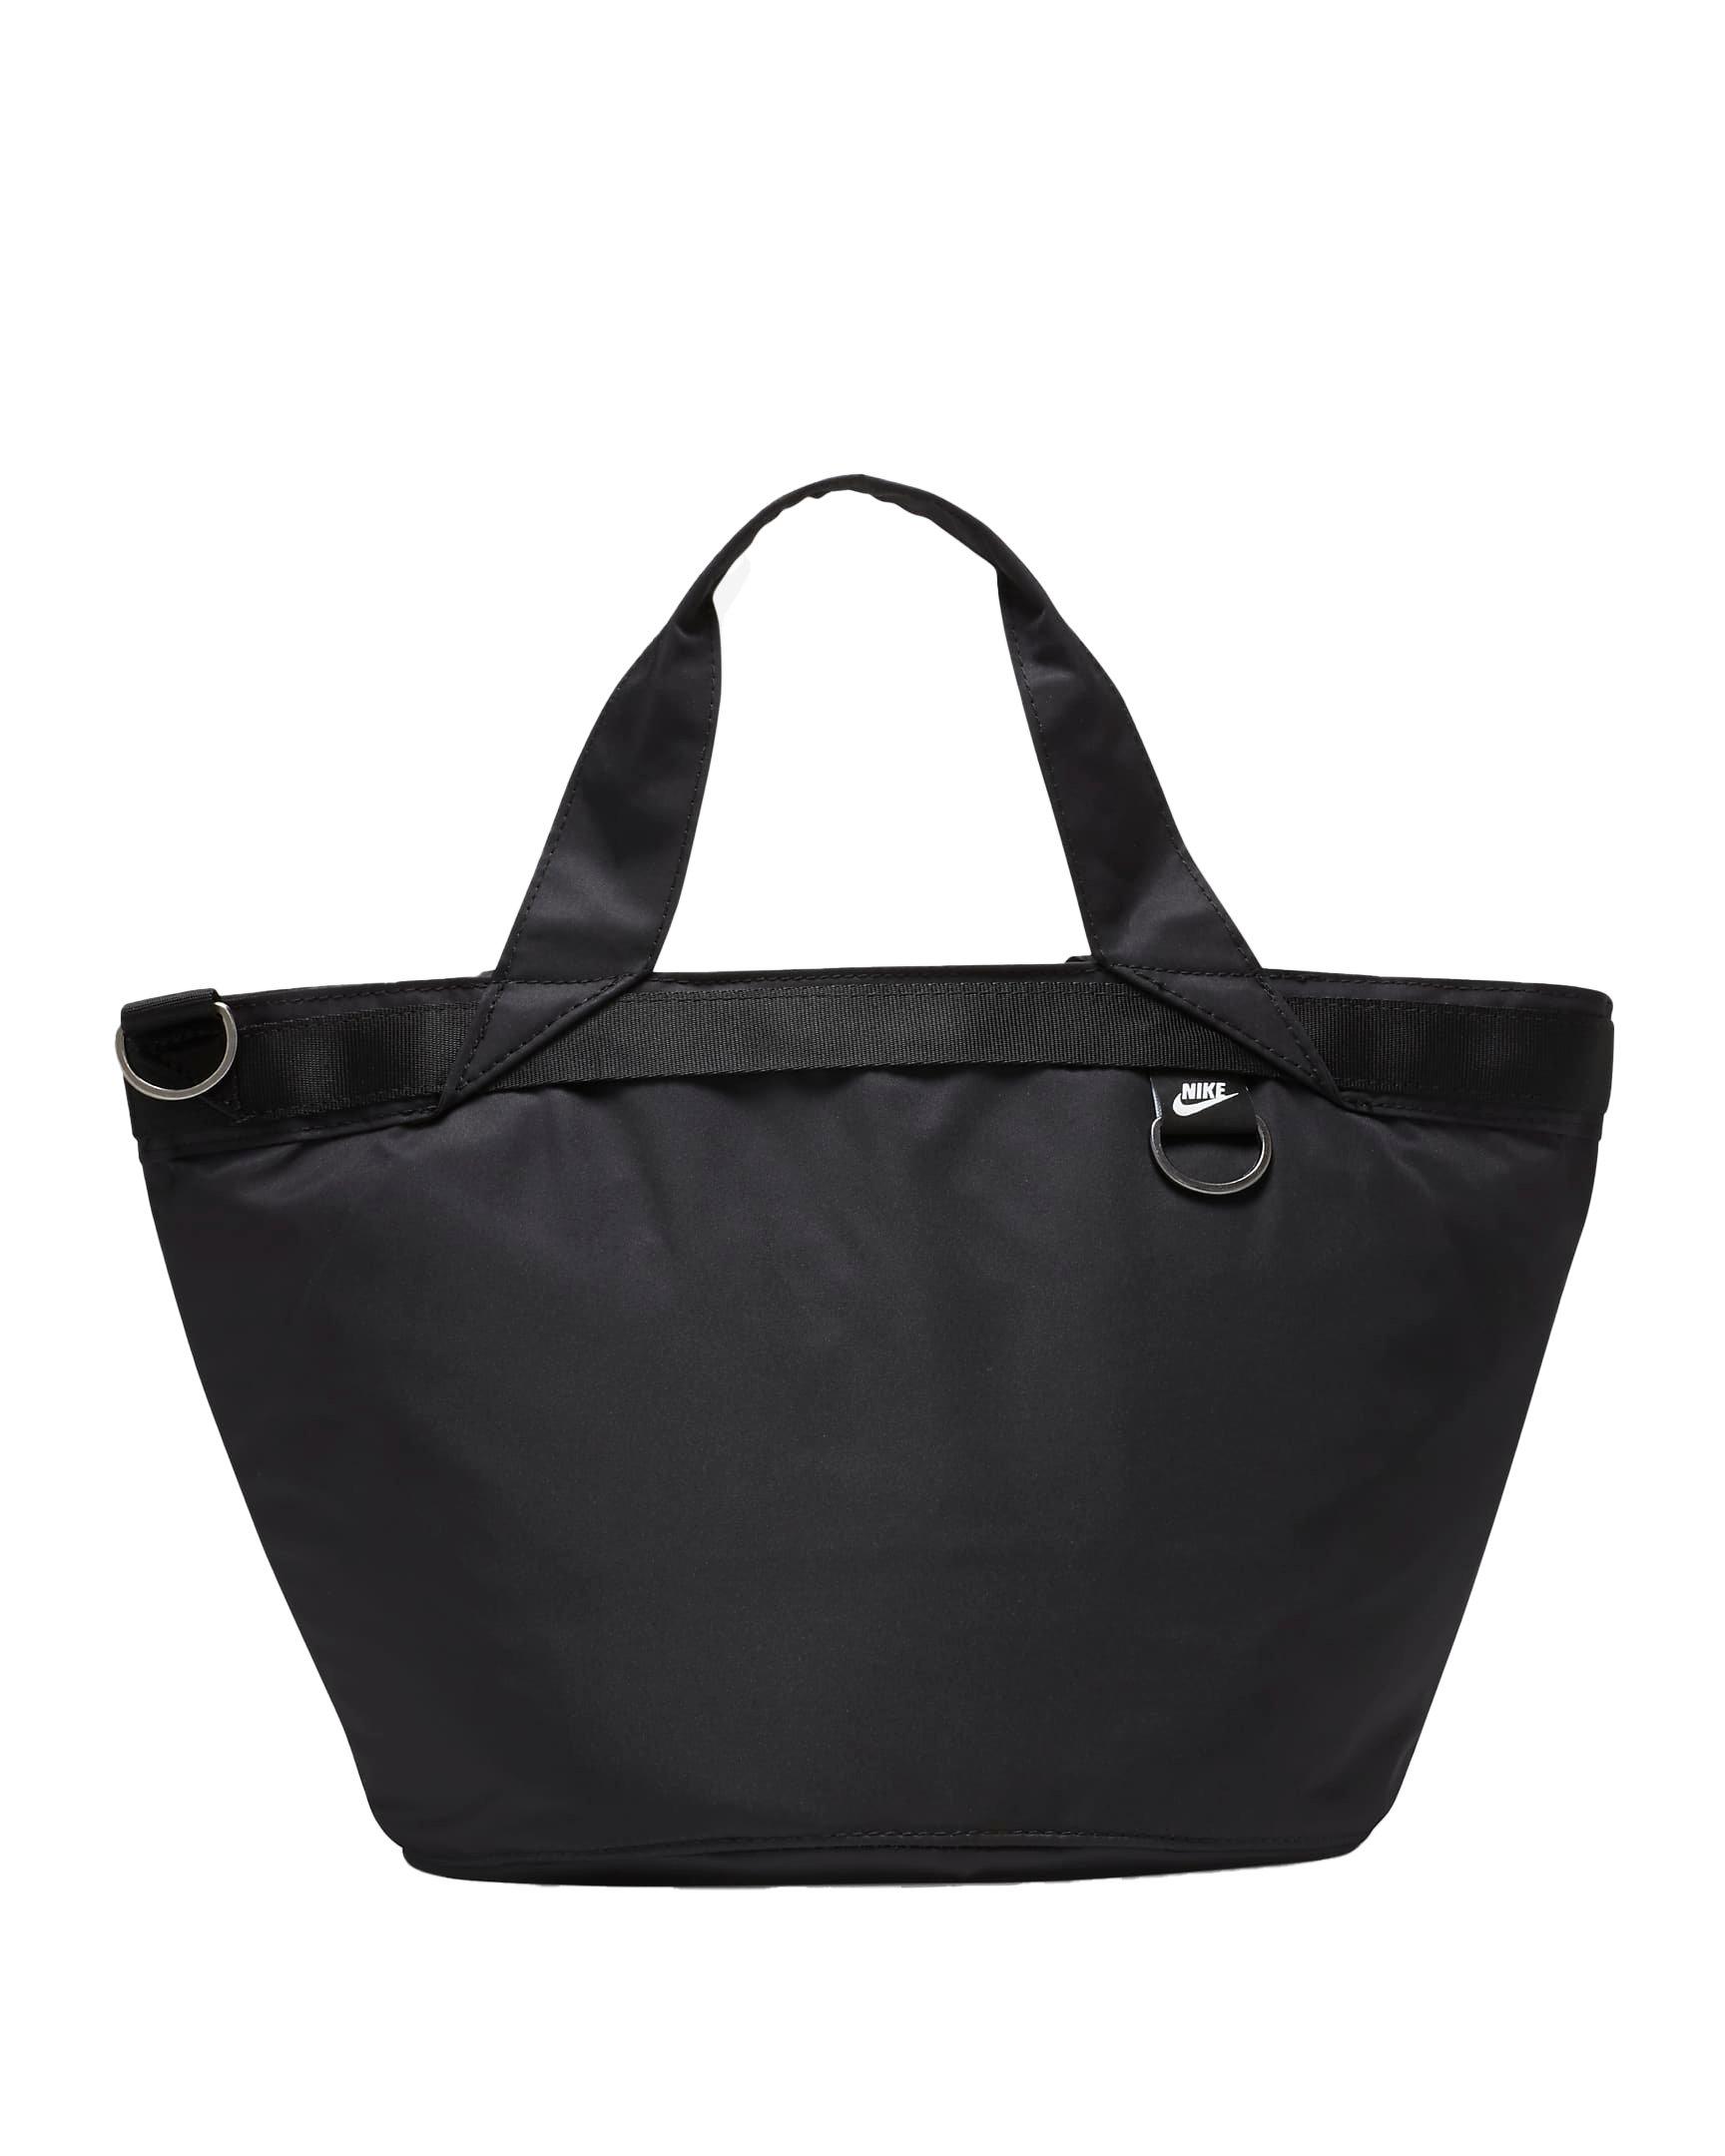 What's in the bag-Gym Edition- Nike Sportswear Futura Luxe Women's Tote -  of the comely